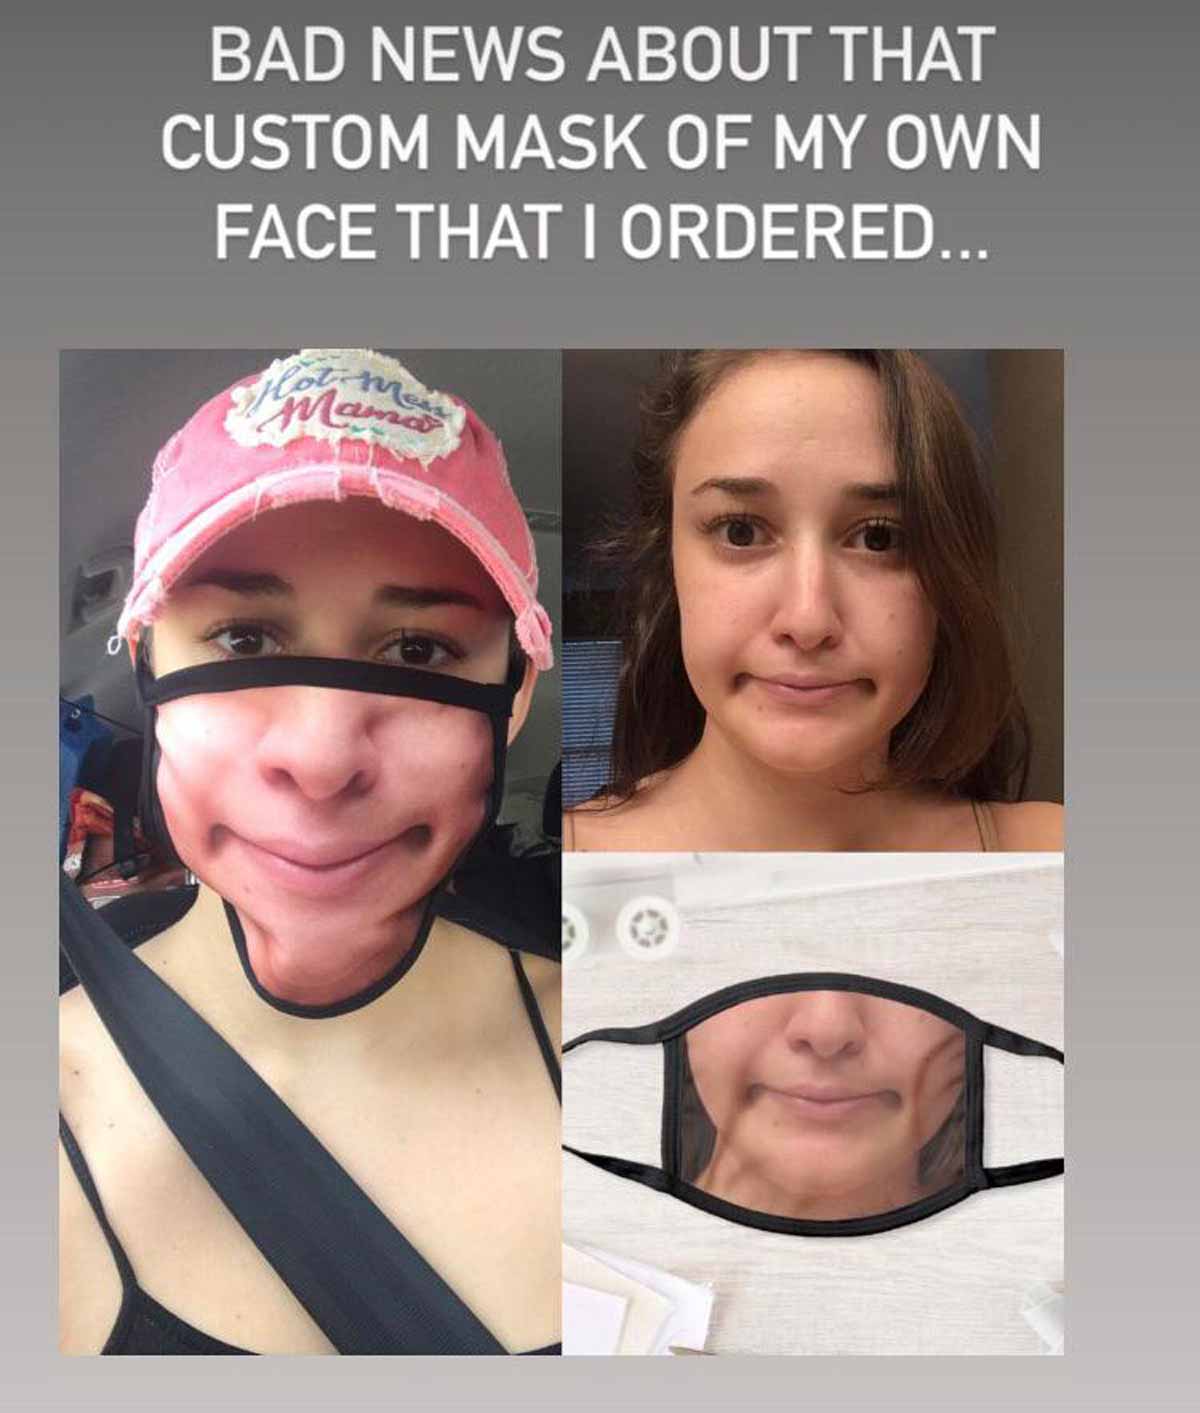 Funny pic of a woman who had her face printed on a mask and then the text 'bad news about that custom mask of my own face that I ordered'